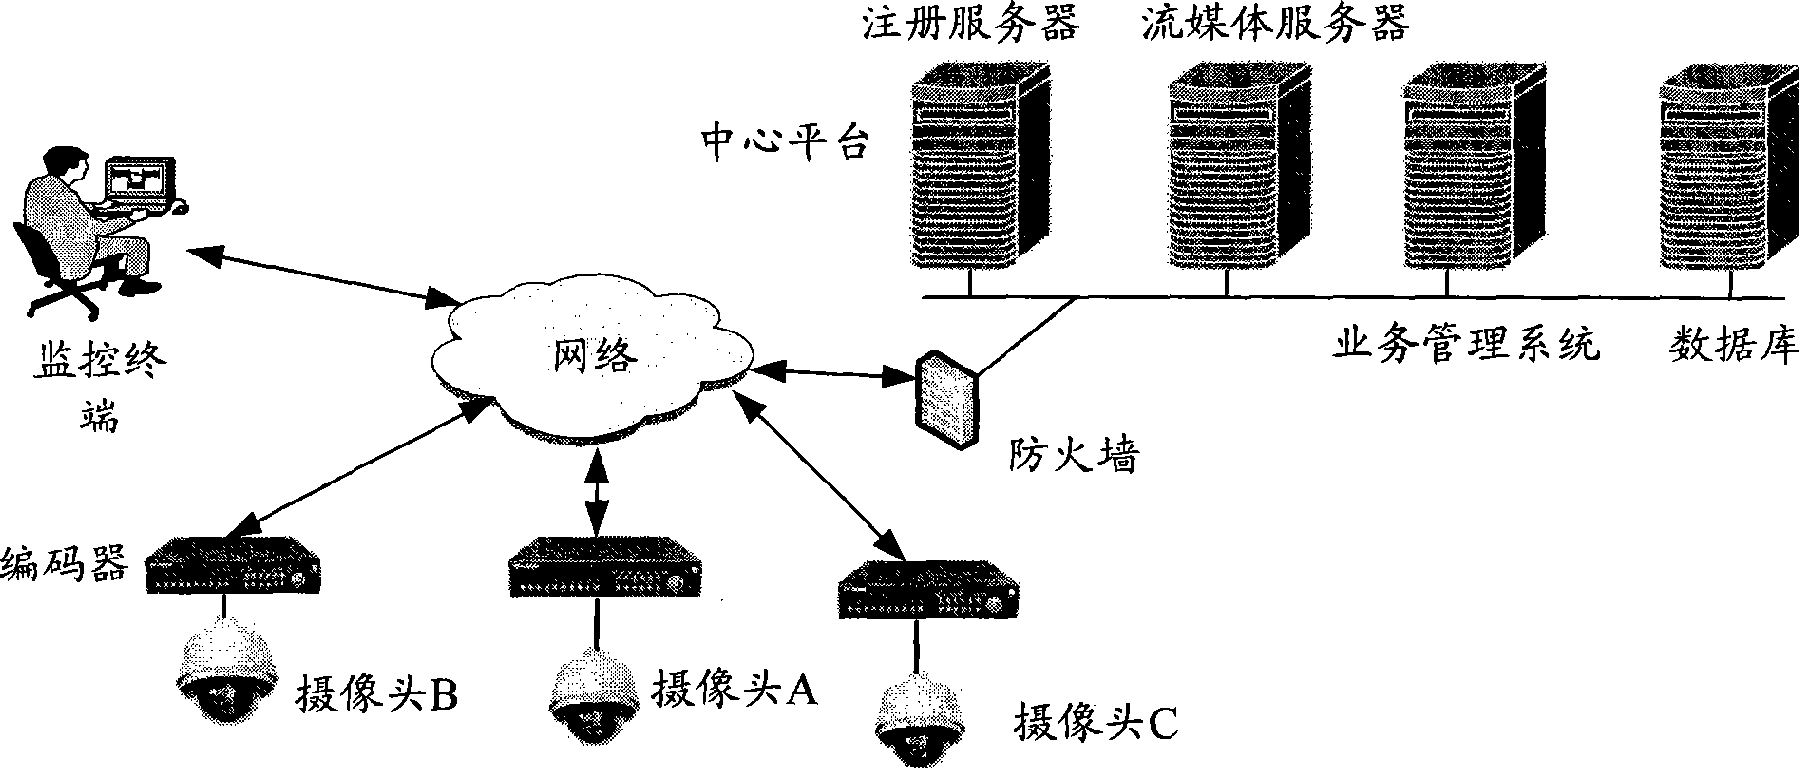 Ganged monitoring system and implementing method